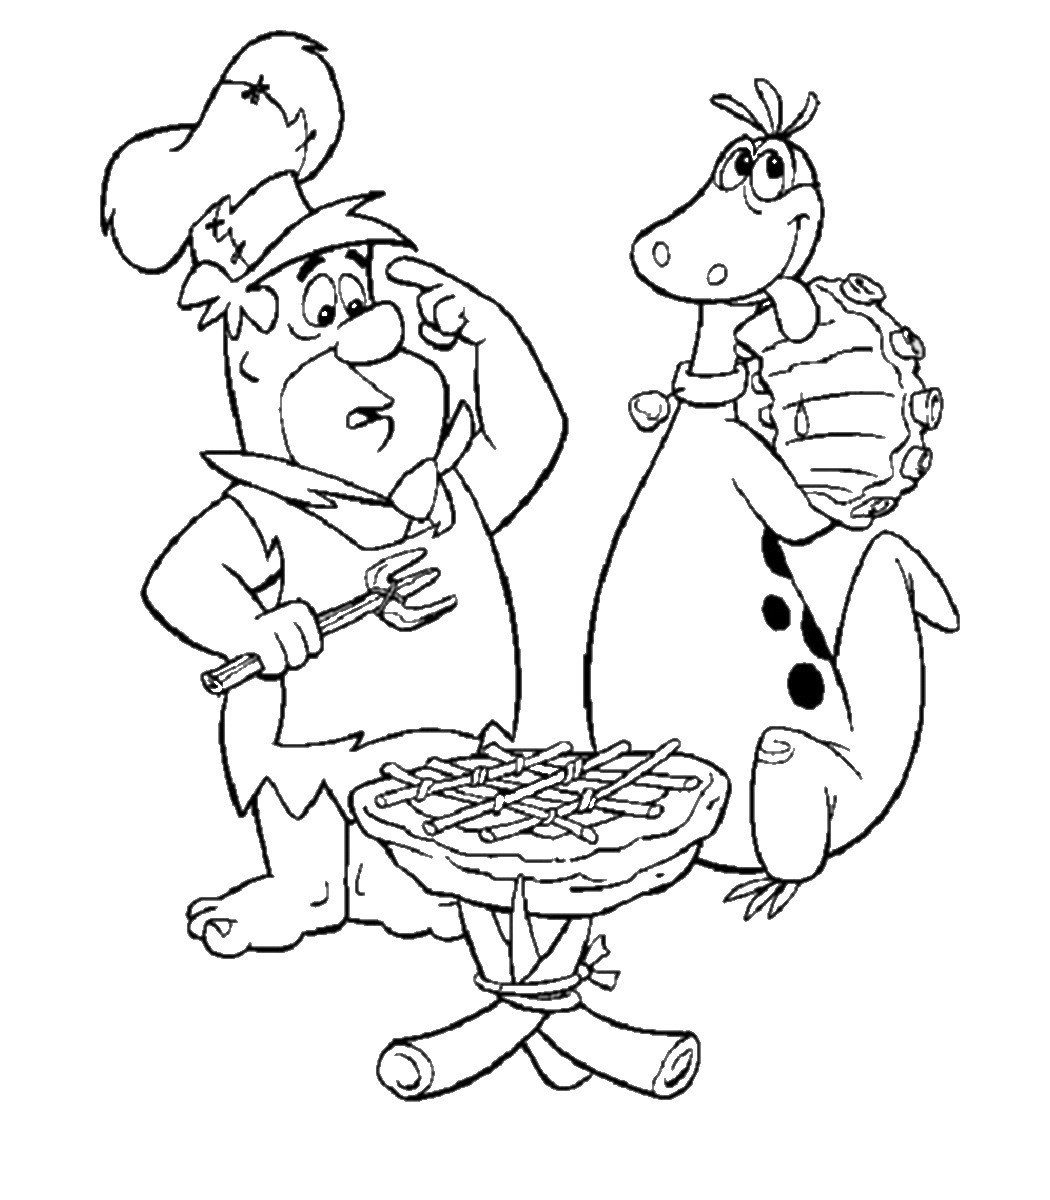 Coloring Pages For
 The Flintstones Coloring Pages